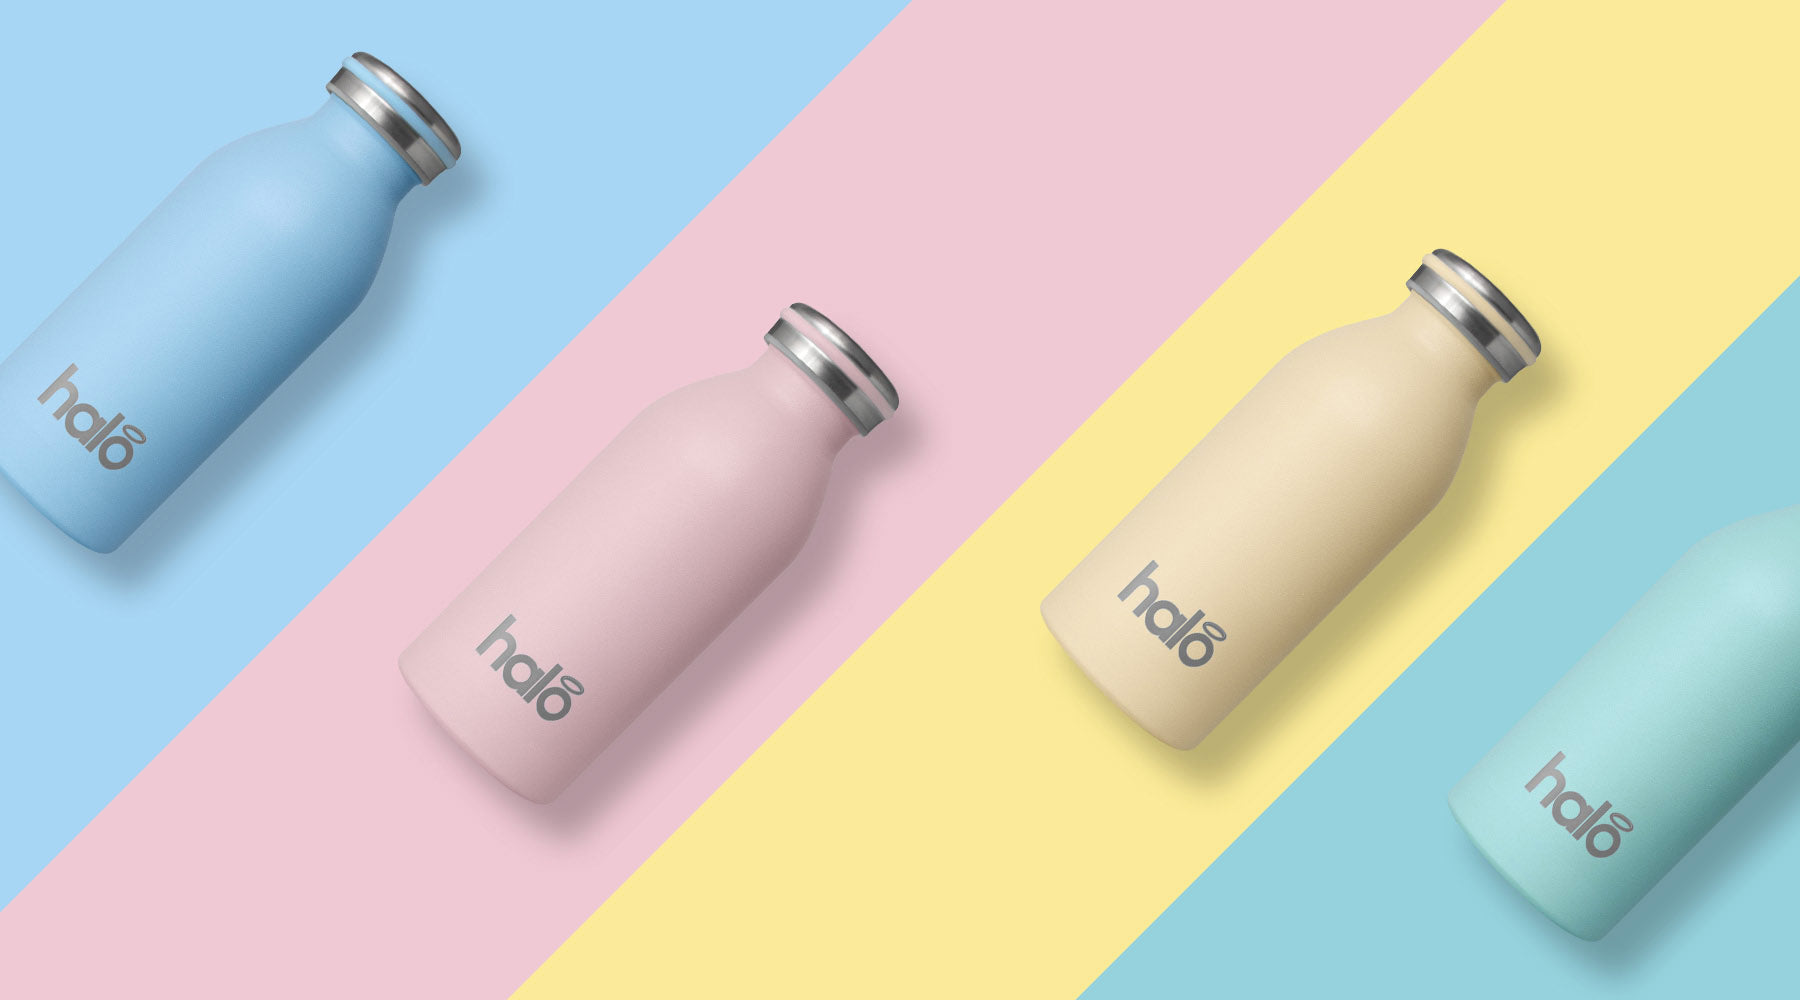 Halo Bottle 350ml steel bottles in blue, pink, yellow and green on striped coloured background.